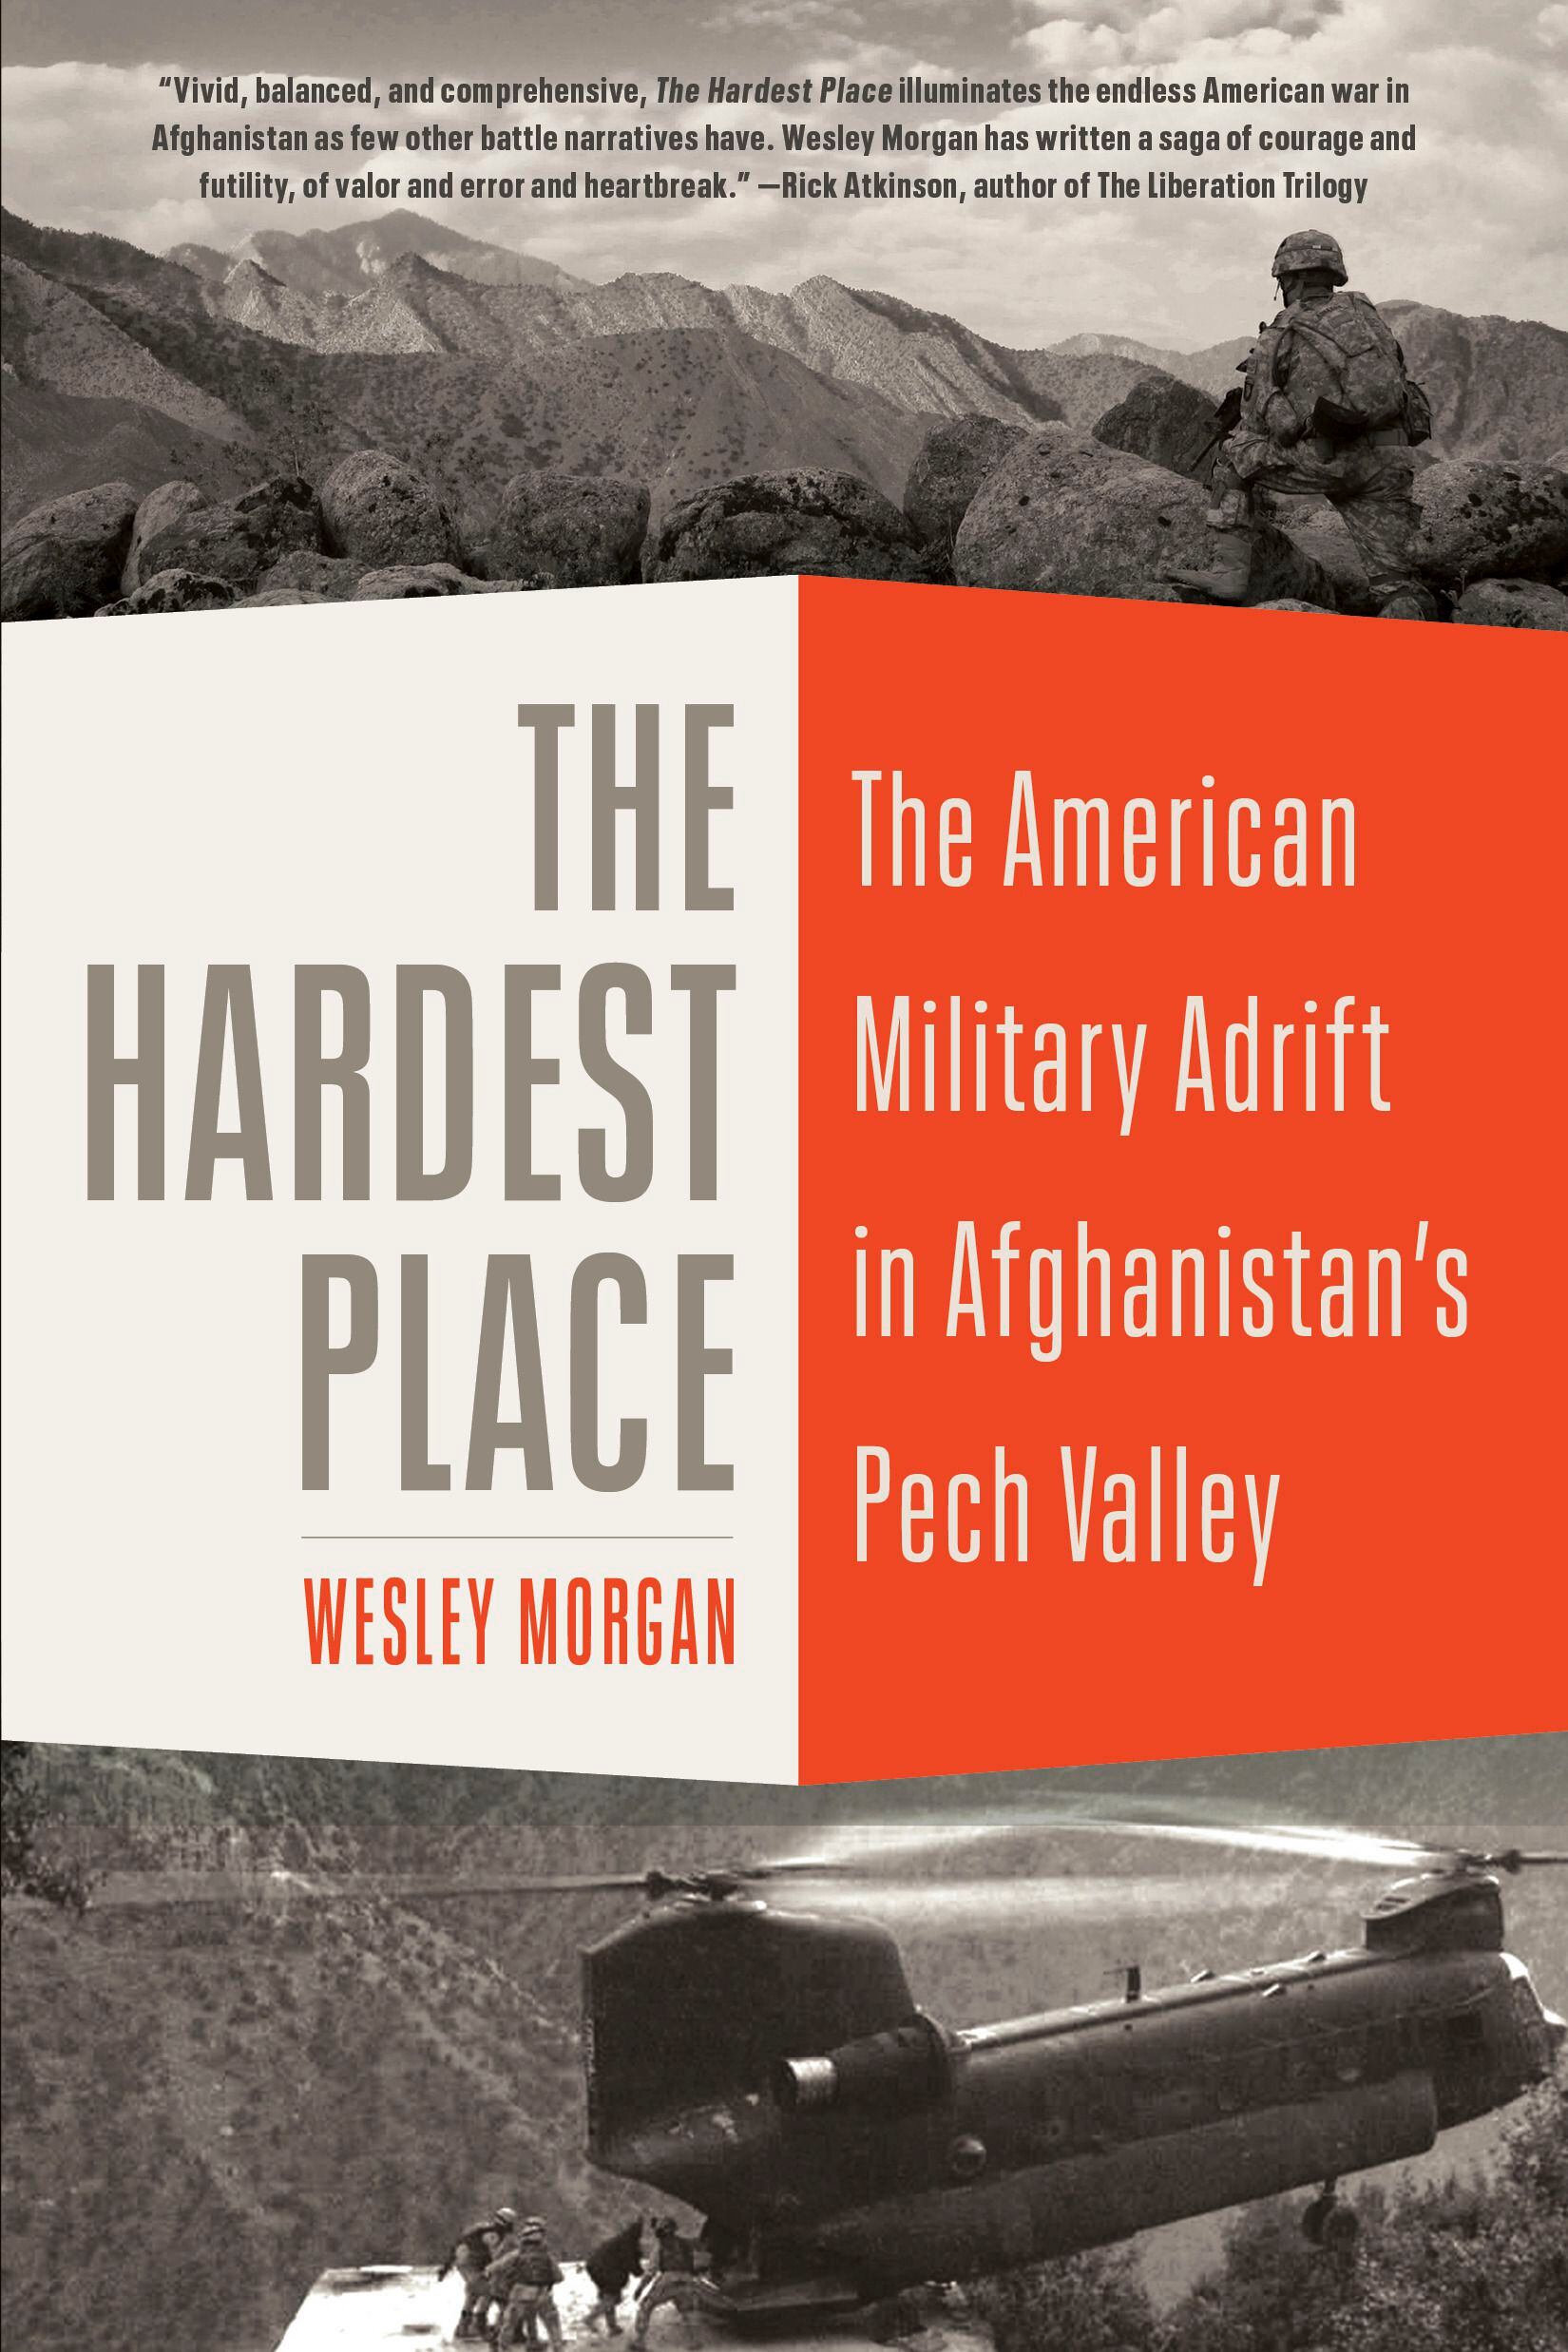 Wesley Morgan wins Colby award for ‘The Hardest Place’